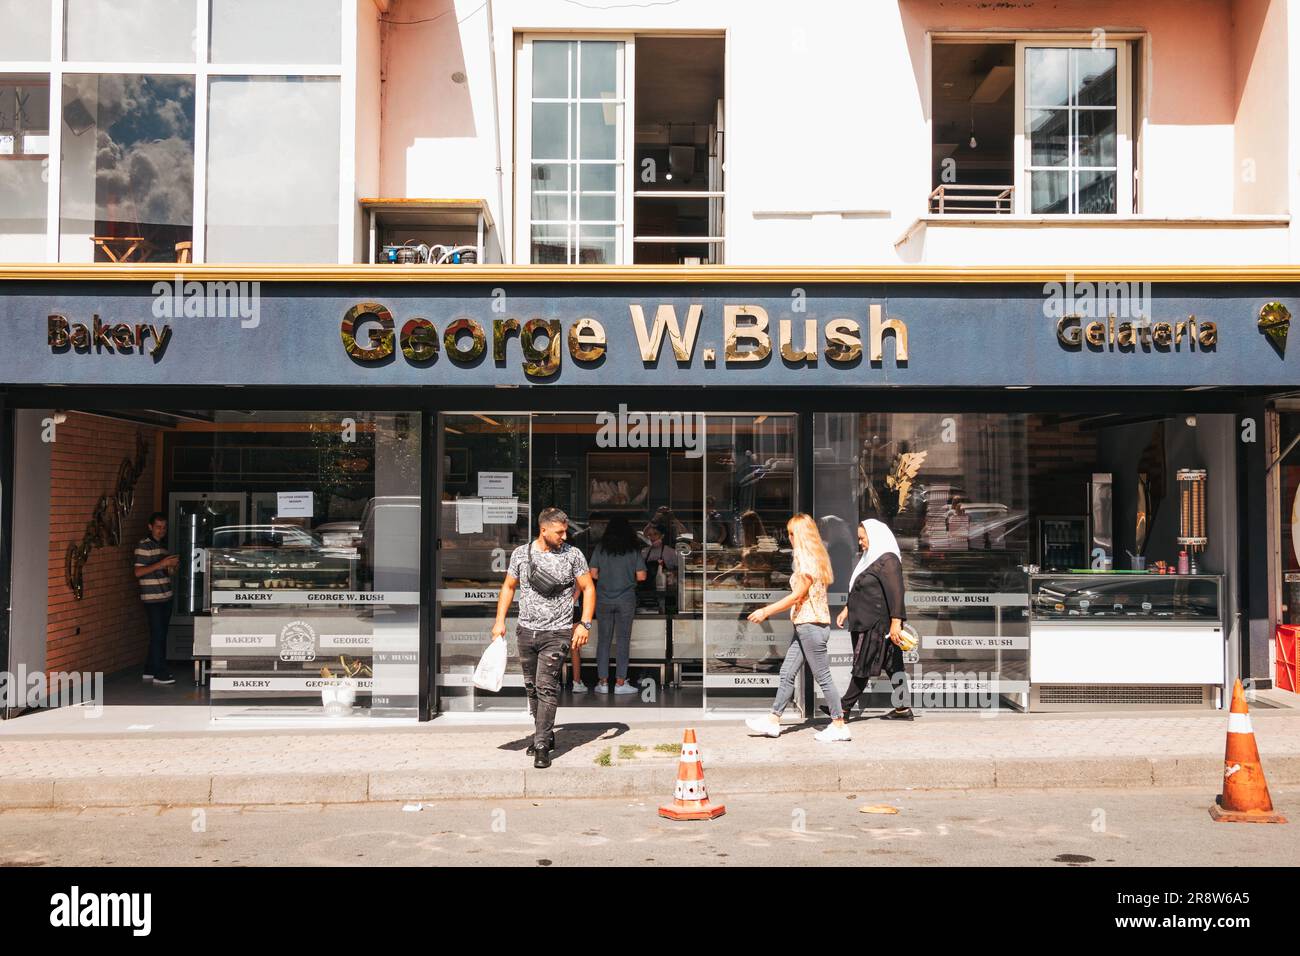 The George W. Bush bakery in Fushë Krujë, Albania. He was the first U.S. president to visit Albania post-communism, and stopped by this small town Stock Photo